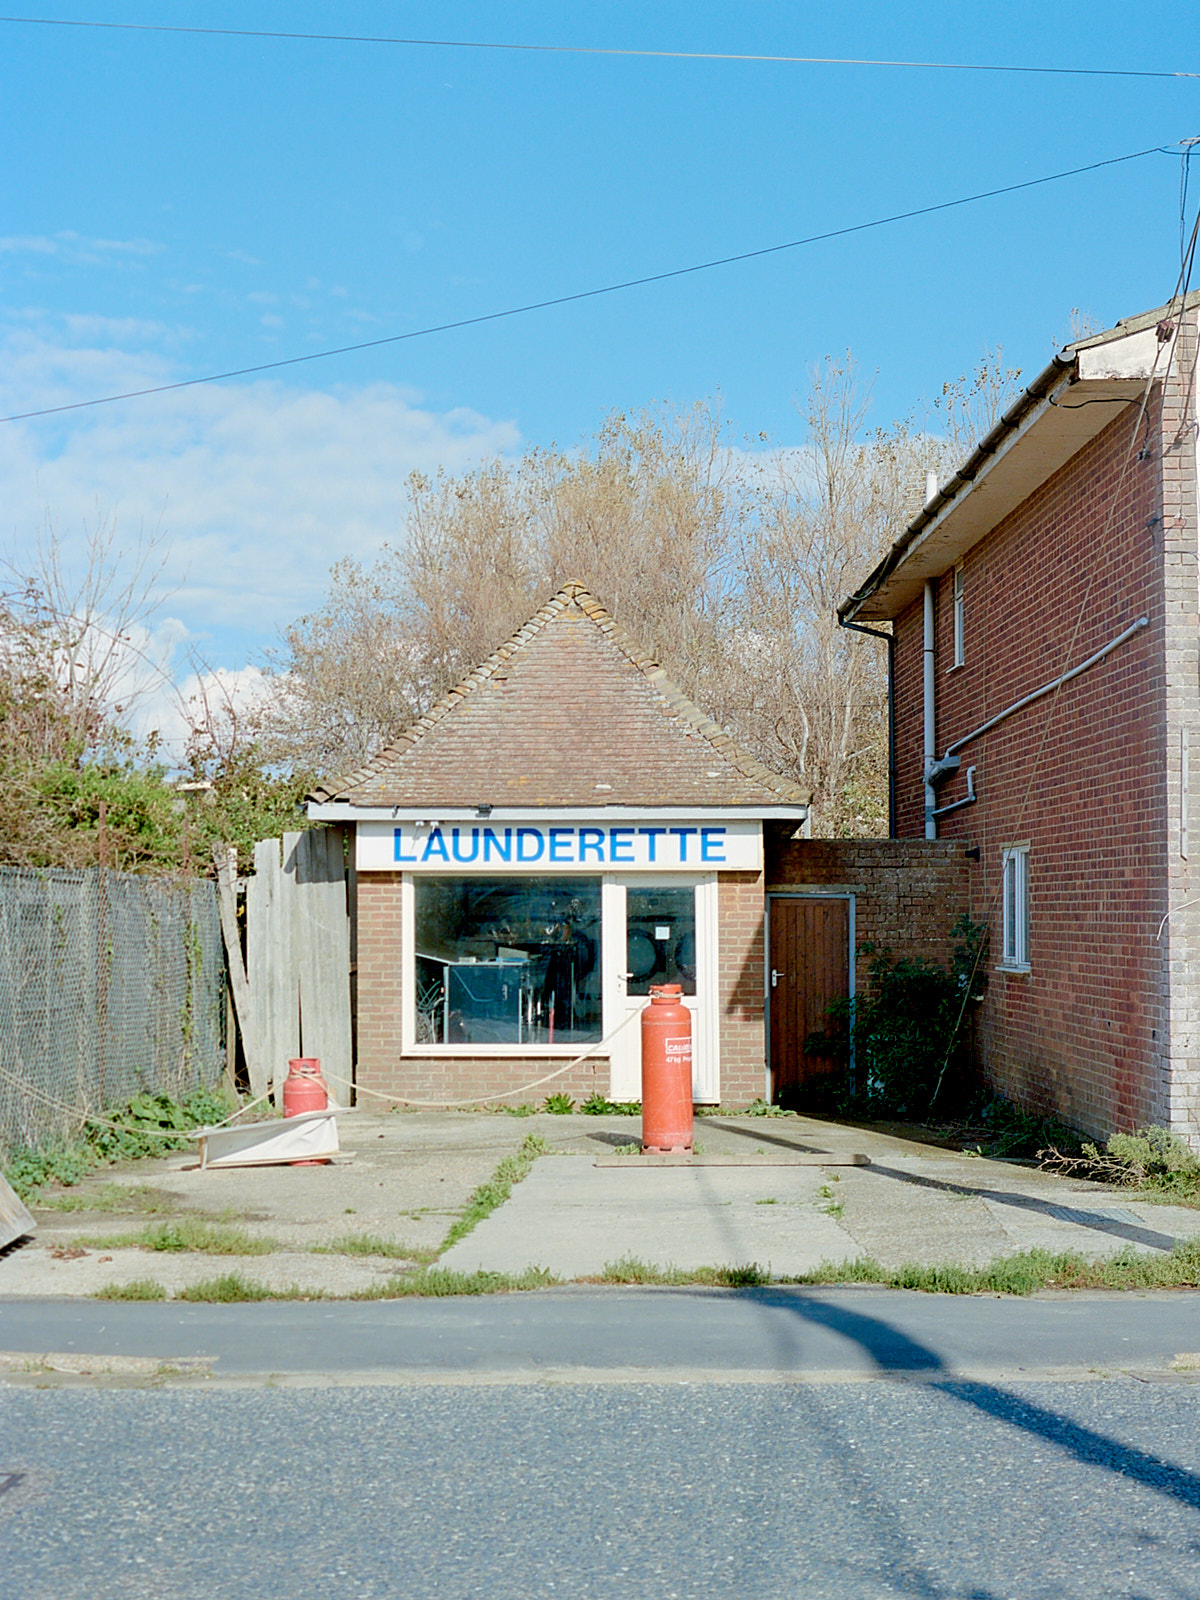 Camber Sands, Launderette